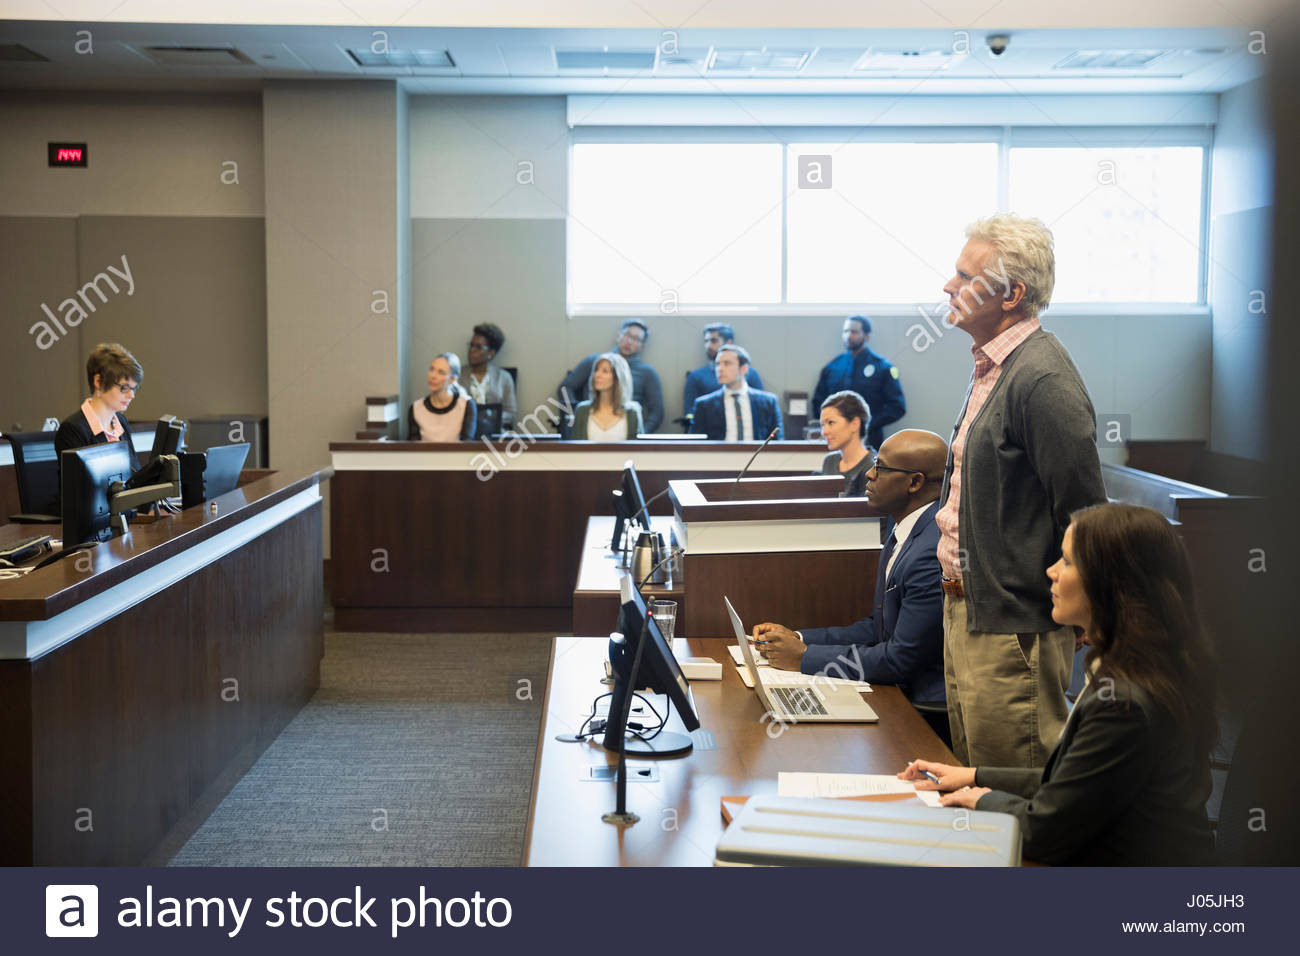 Defendant standing in legal trial courtroom Stock Photo